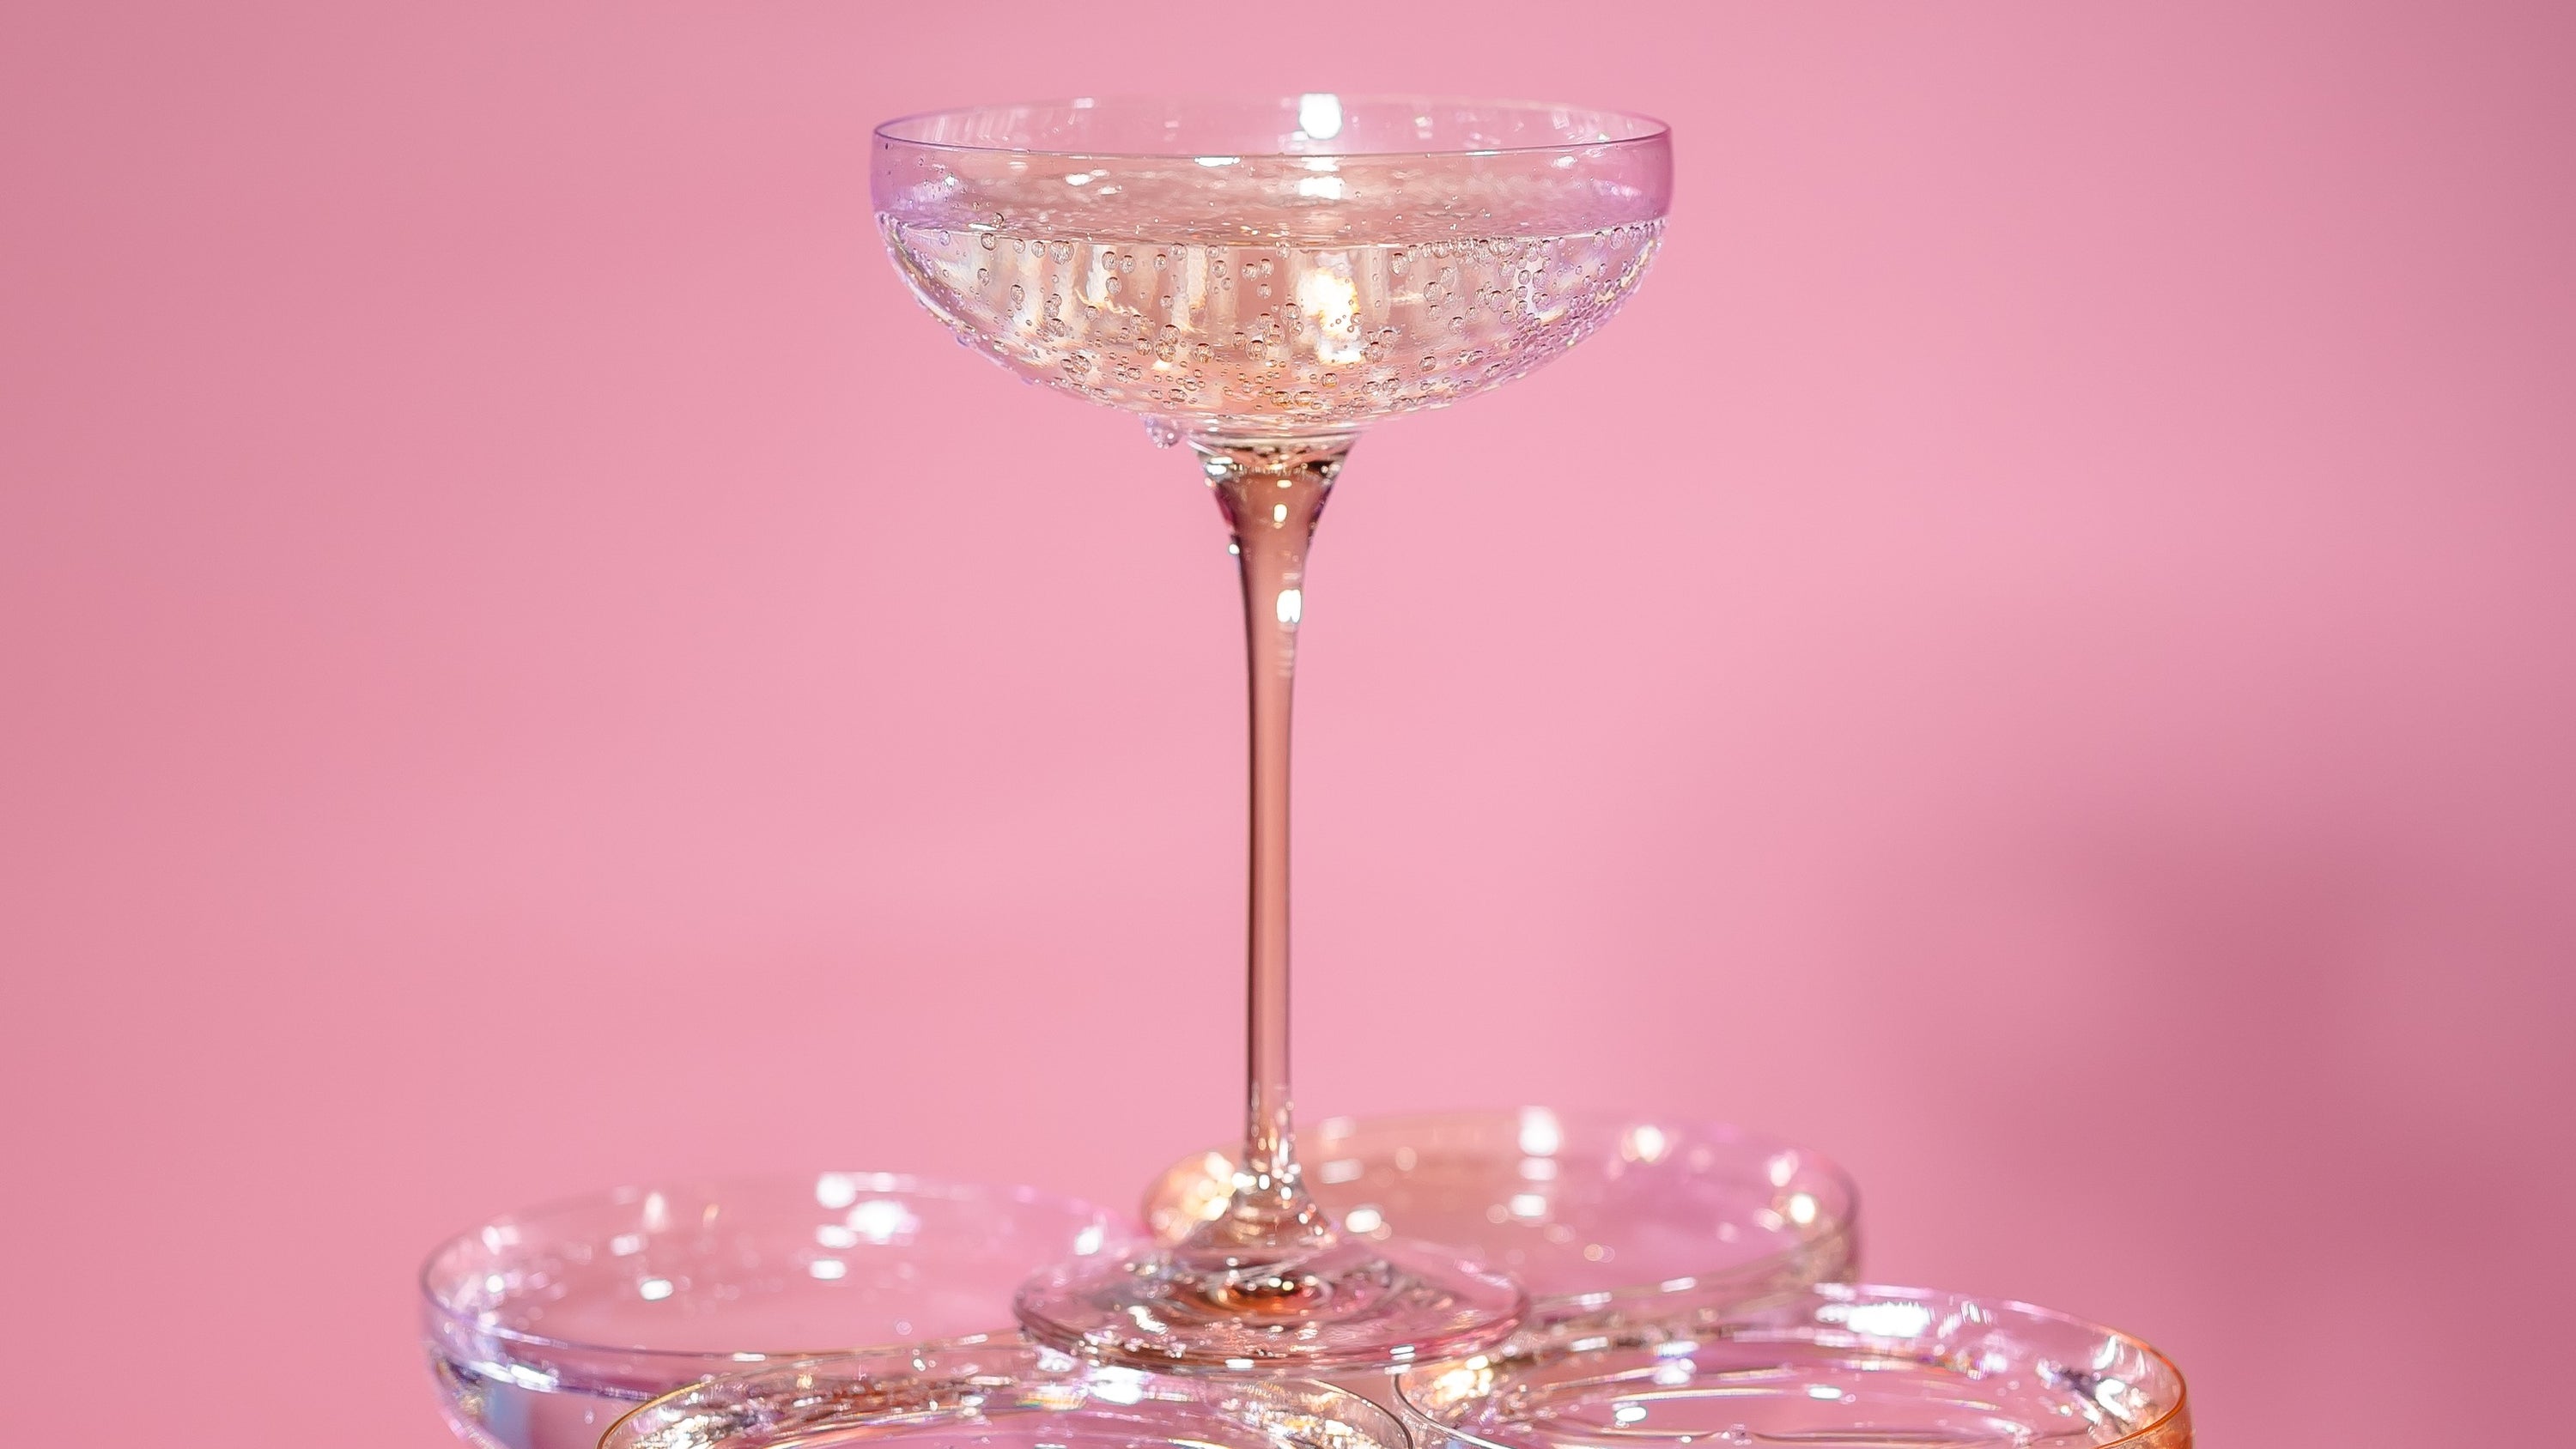 Stack, Pour, Cheer with Estelle Champagne Coupes